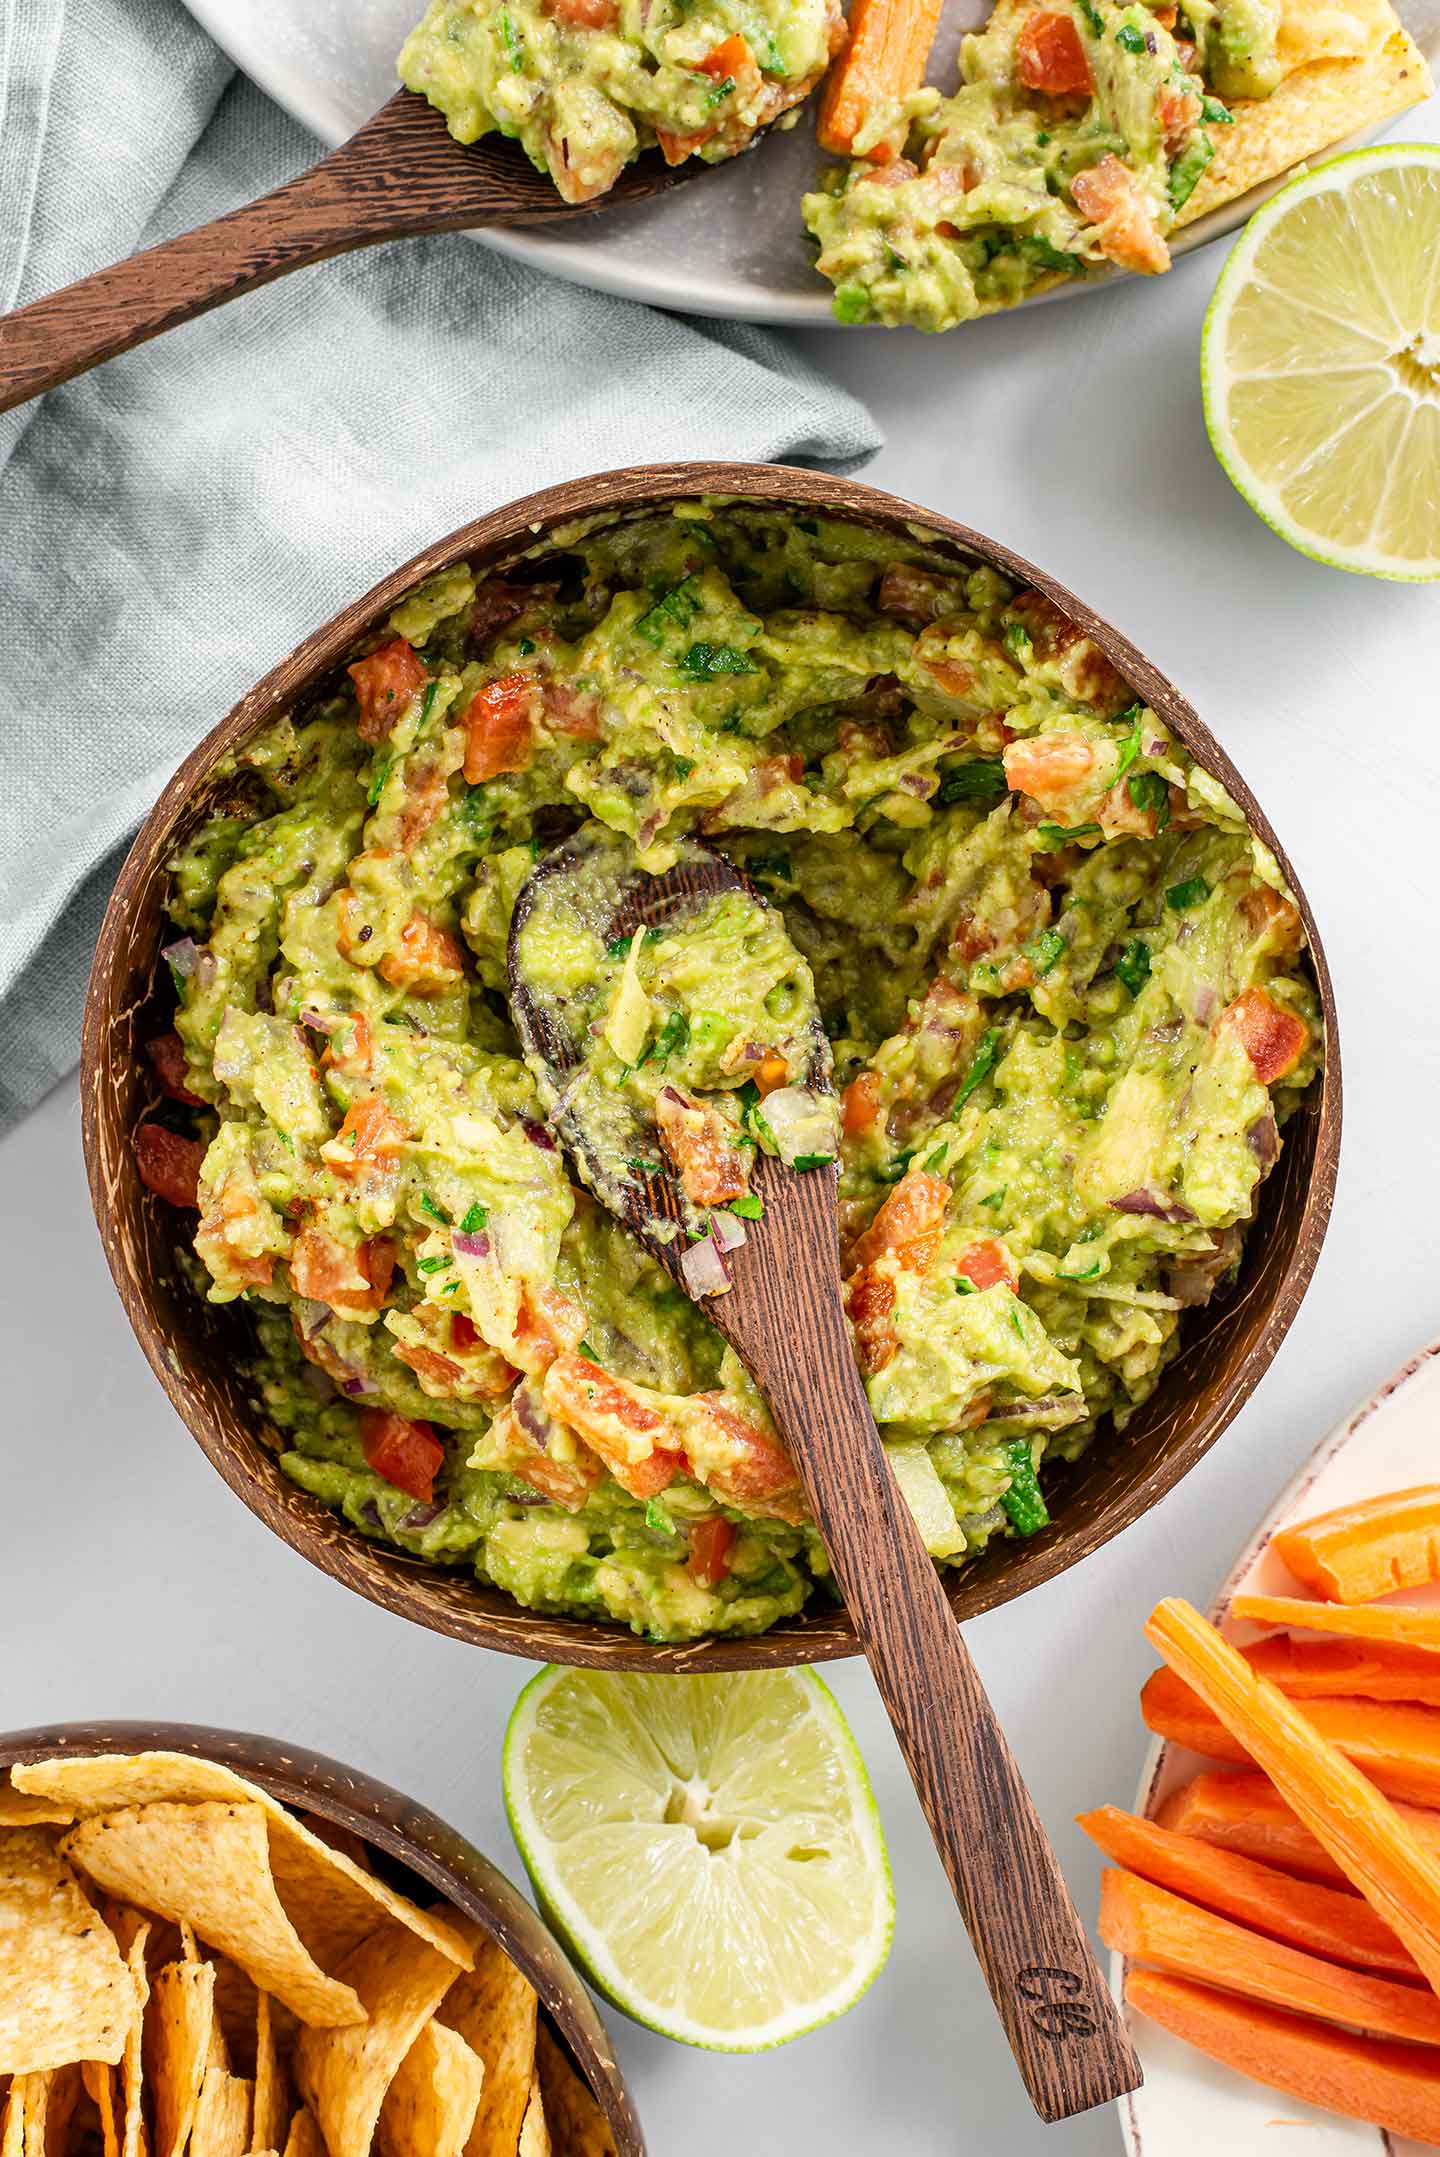 Top down view of a bamboo spoon in timely guacamole served in a coconut bowl. Tortilla chips, carrot sticks, and a squeezed lime surround the guacamole.